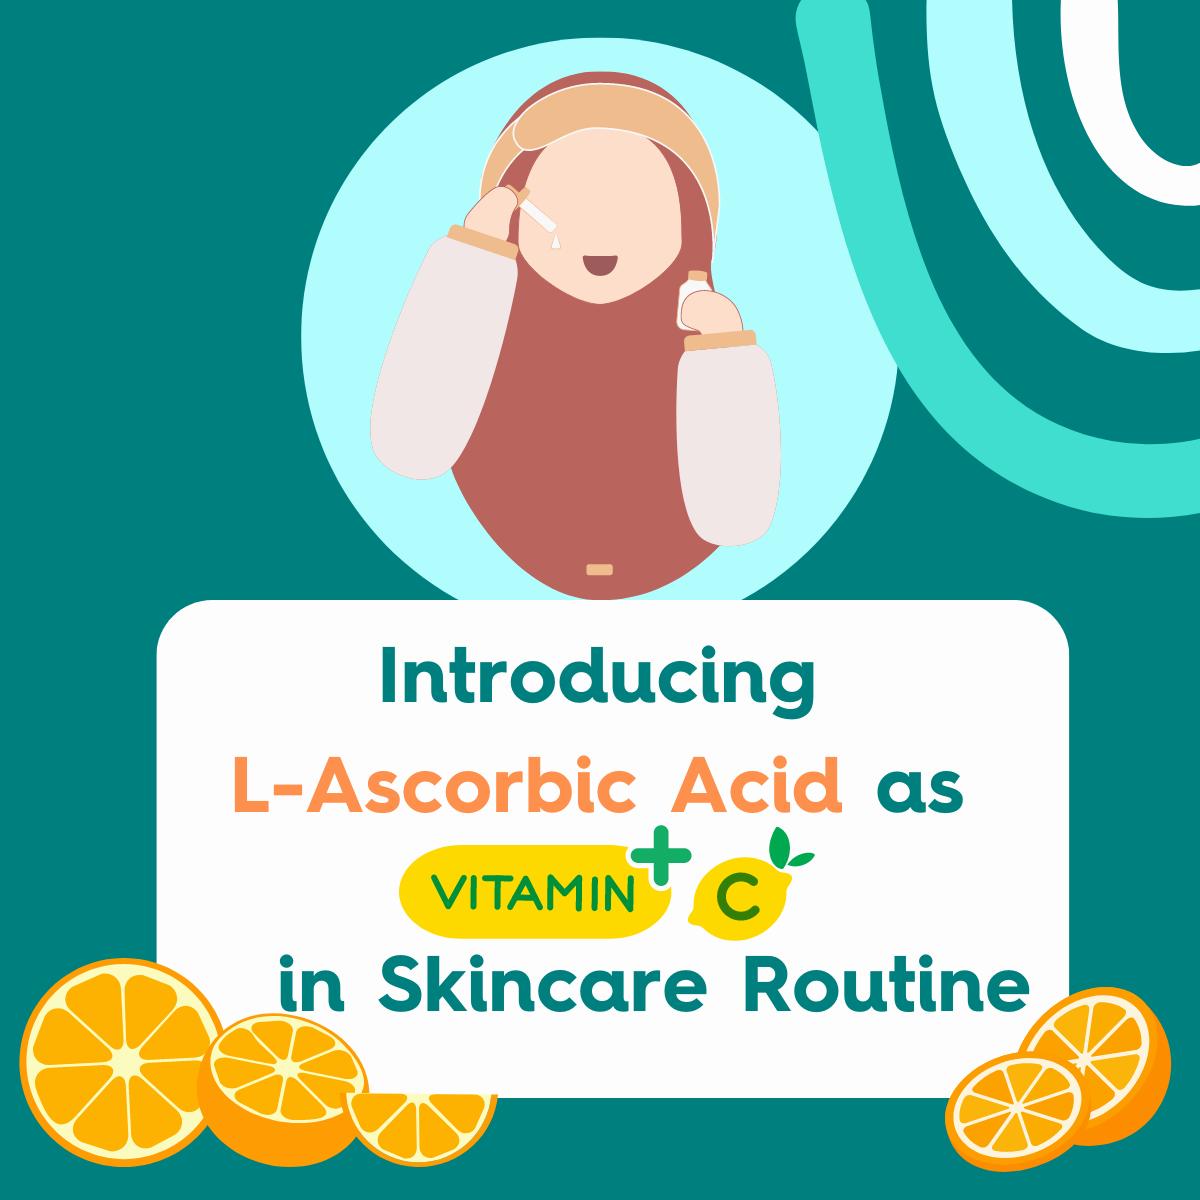 A faceless woman in a hijab applies a drop of skin care product to her face while the text next to her says Introducing L-Ascorbic Acid as Vitamin C in Skincare Routine.